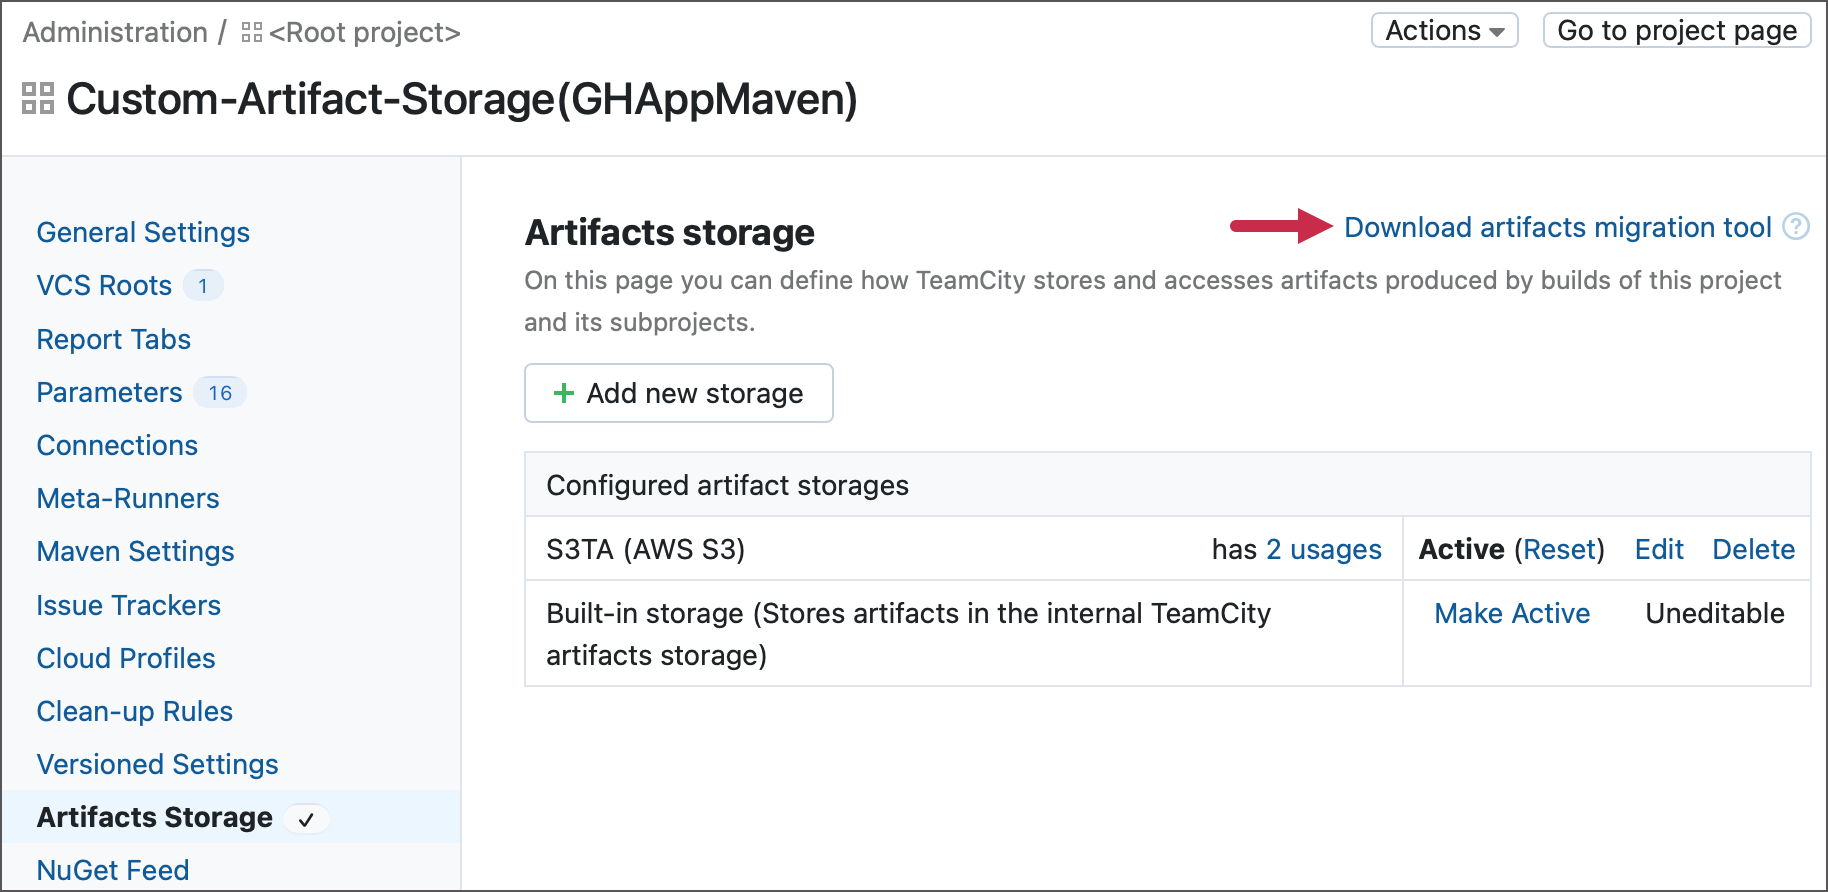 Download artifacts migration tool